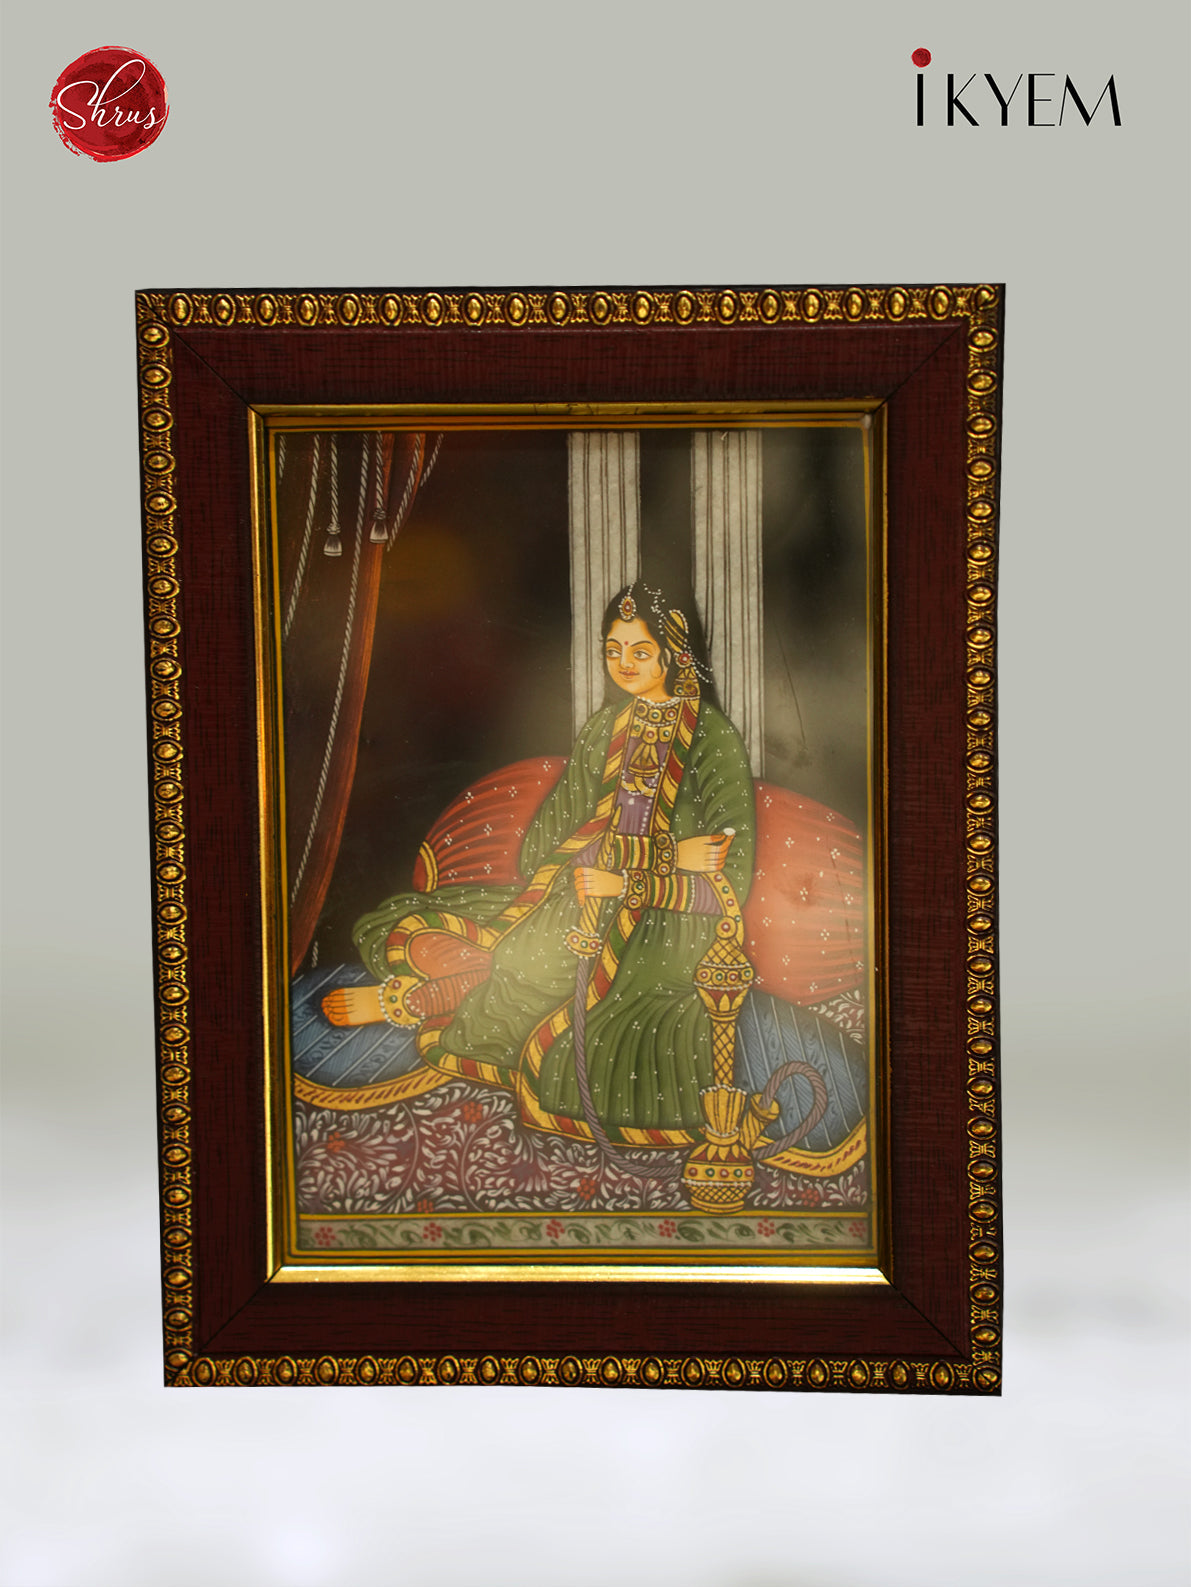 Hand painted Lady portrait on Marble tiles with frame